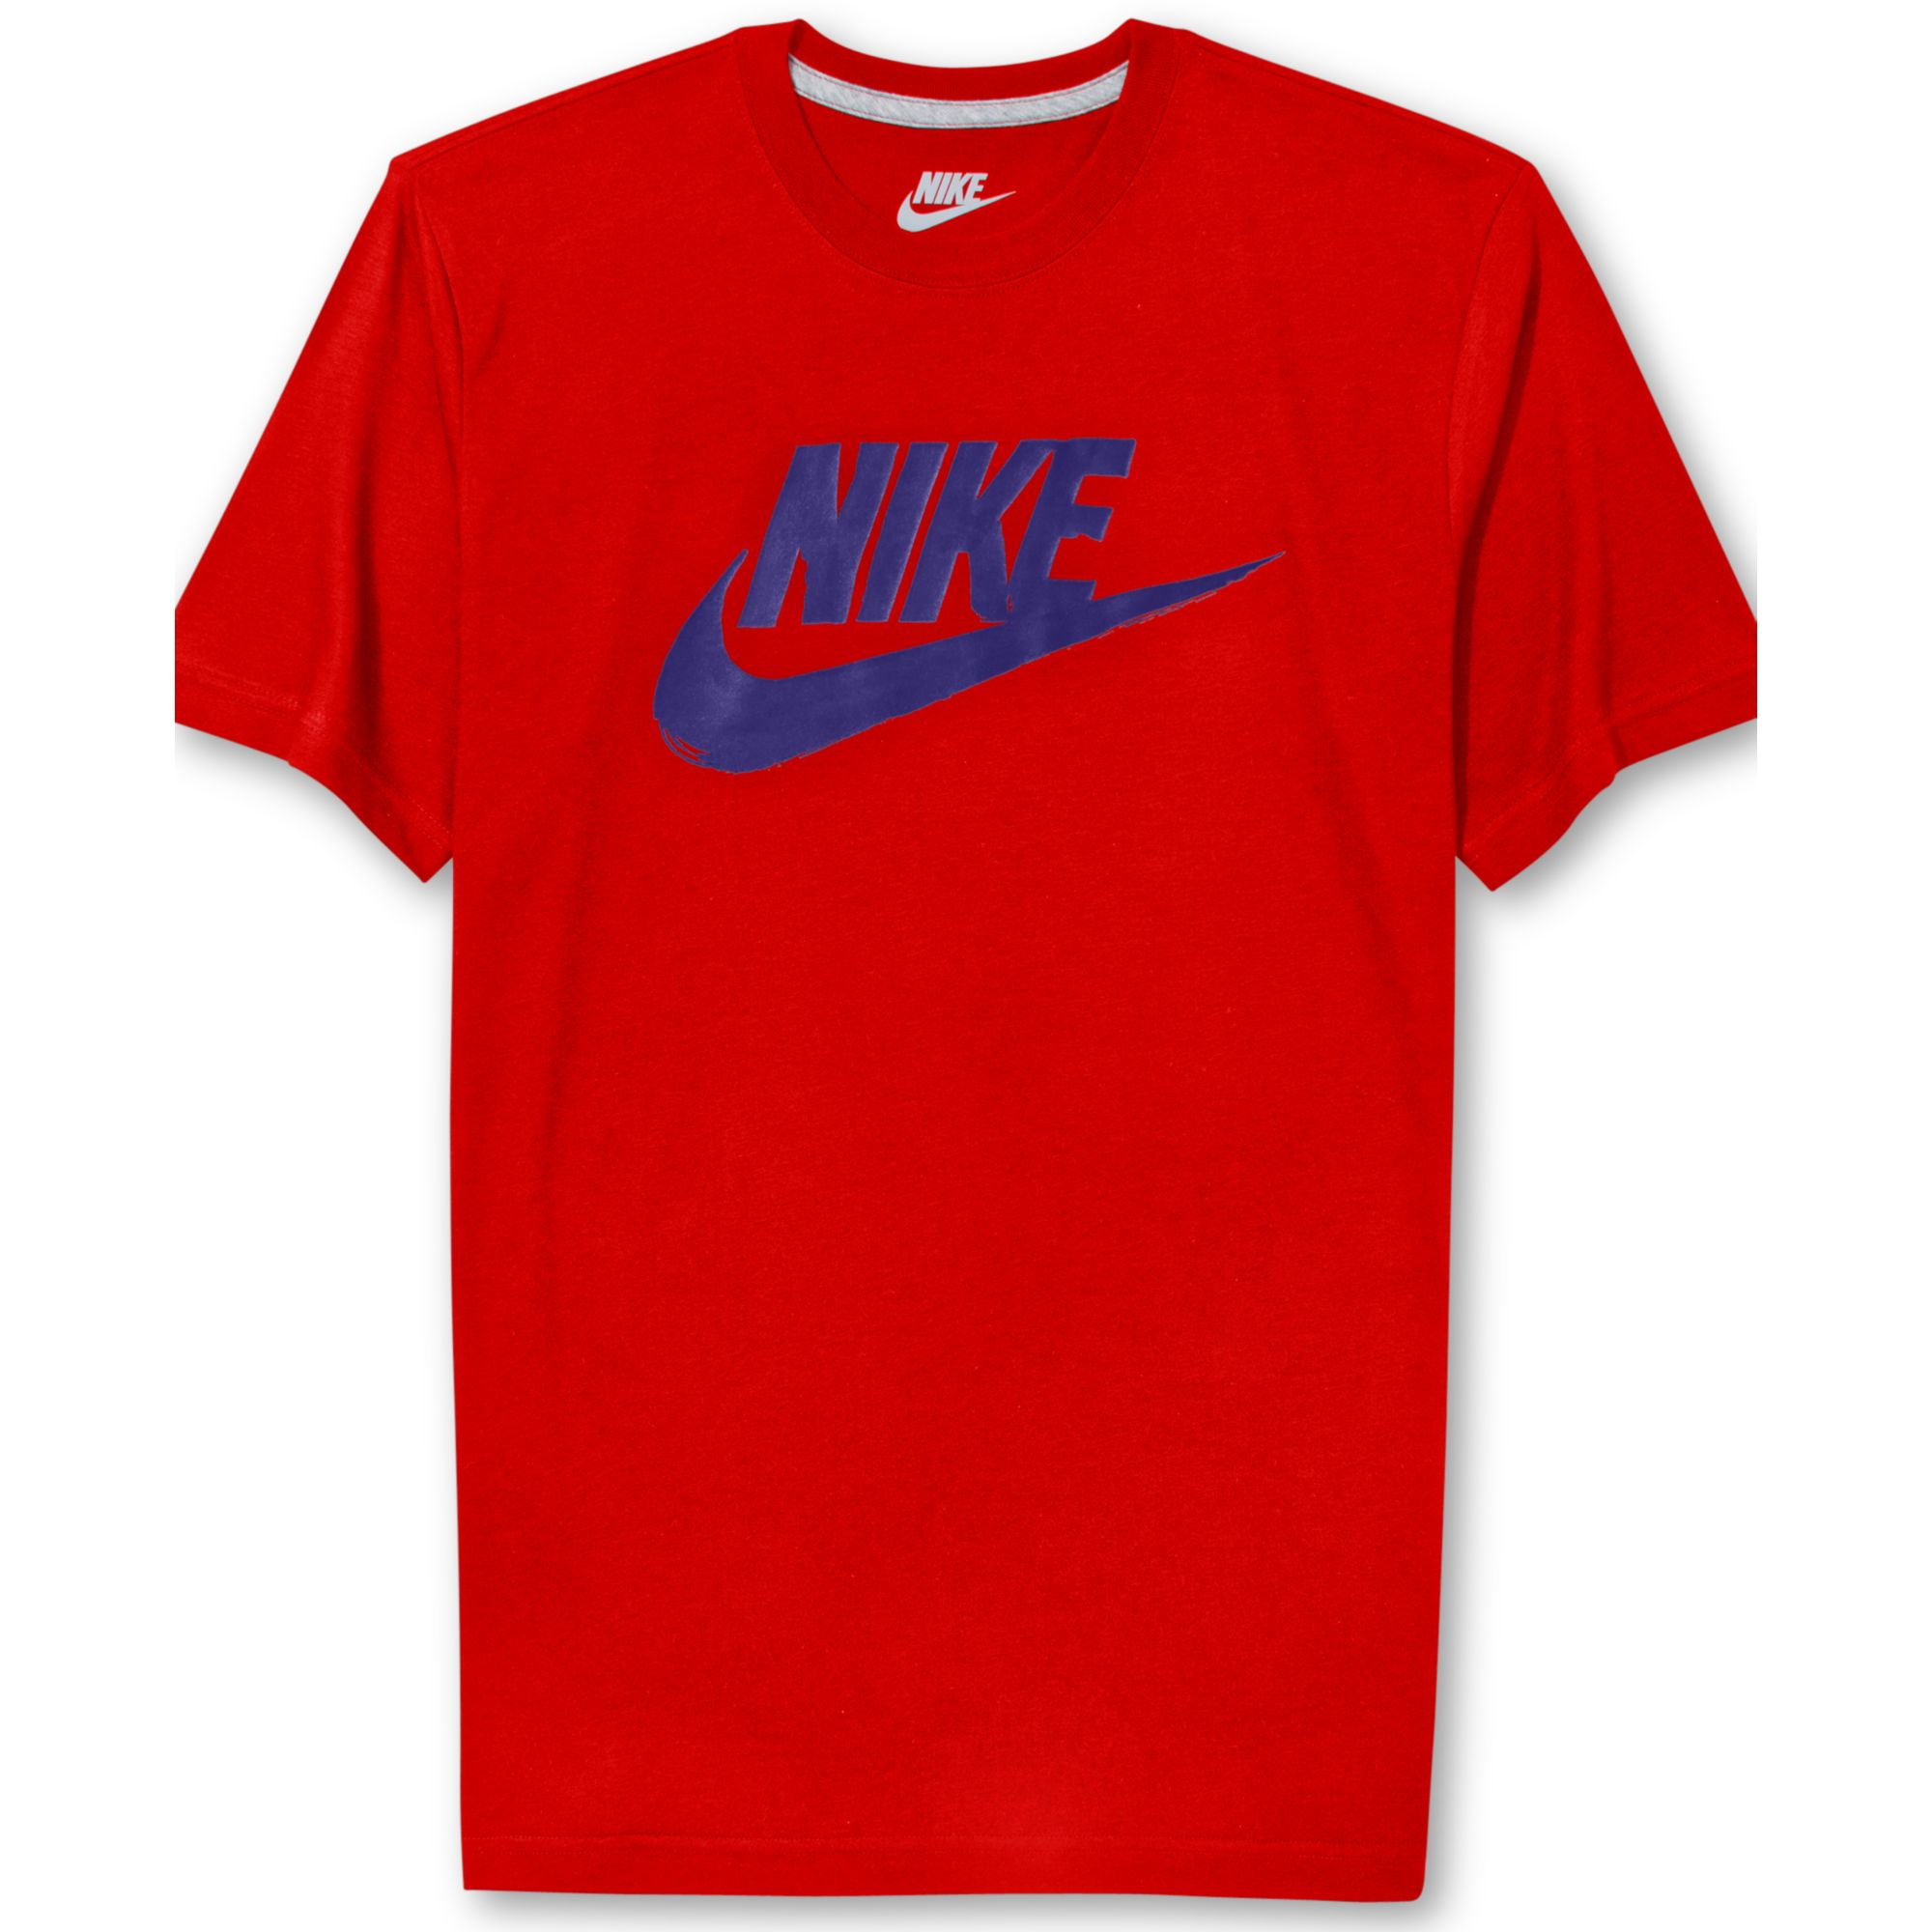 blue and red nike shirt where to buy 